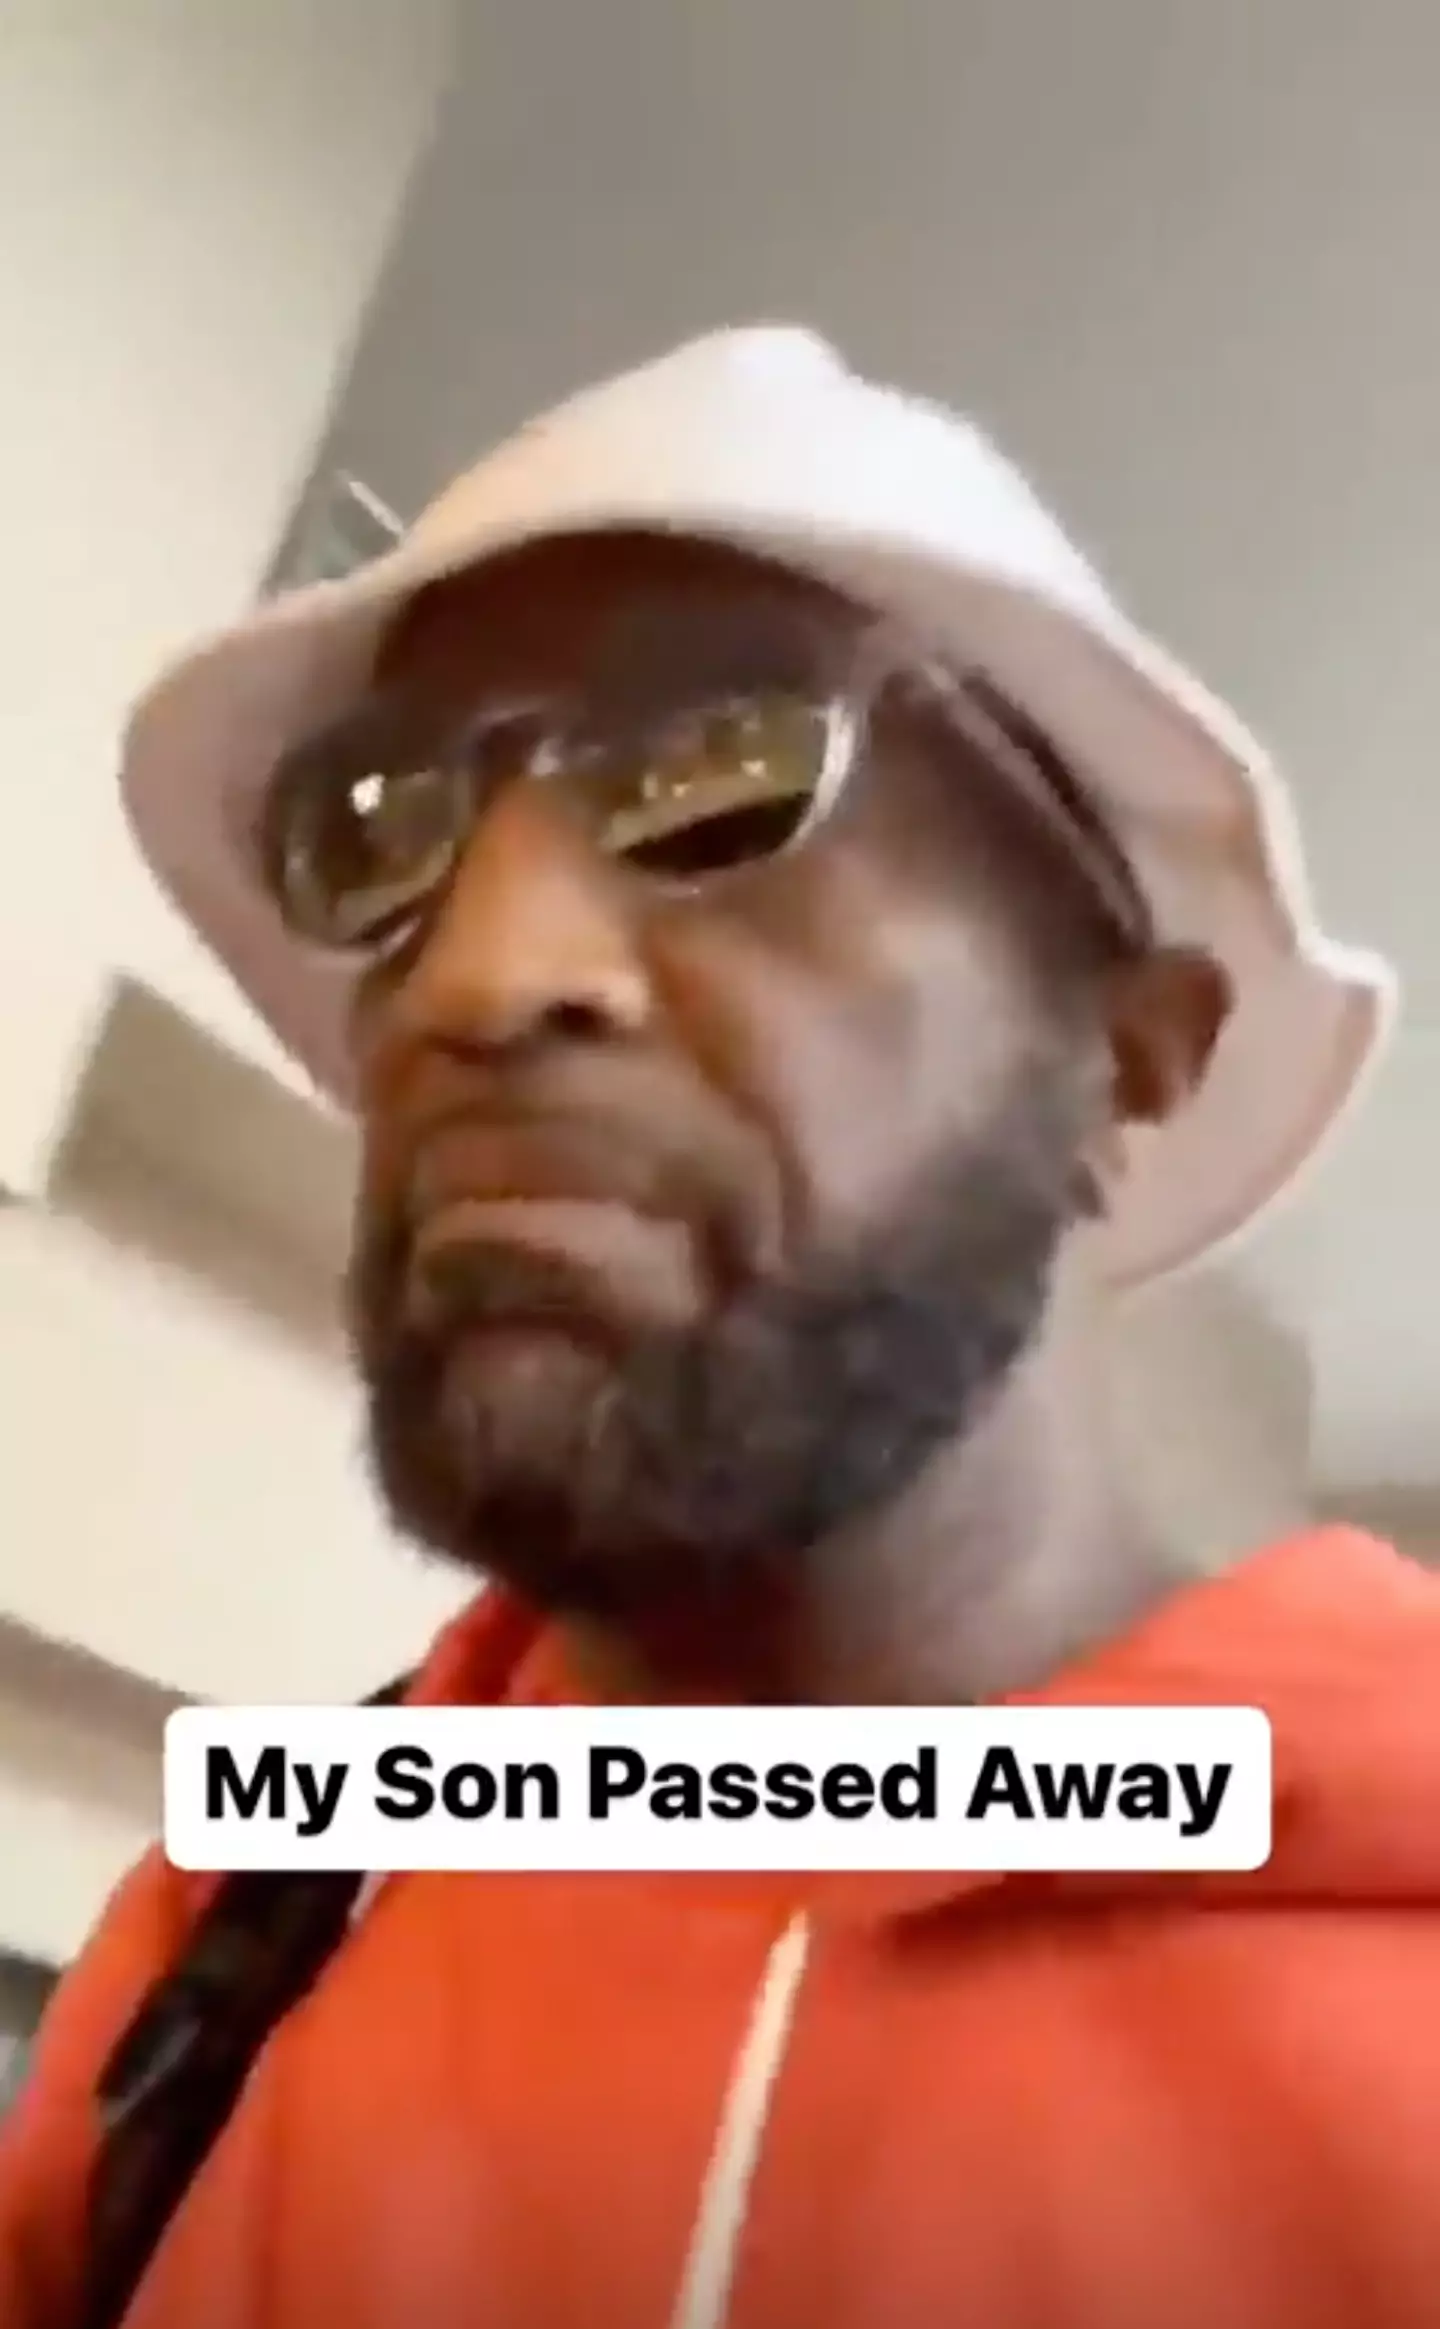 Rickey Smiley revealed his son's death on Instagram.